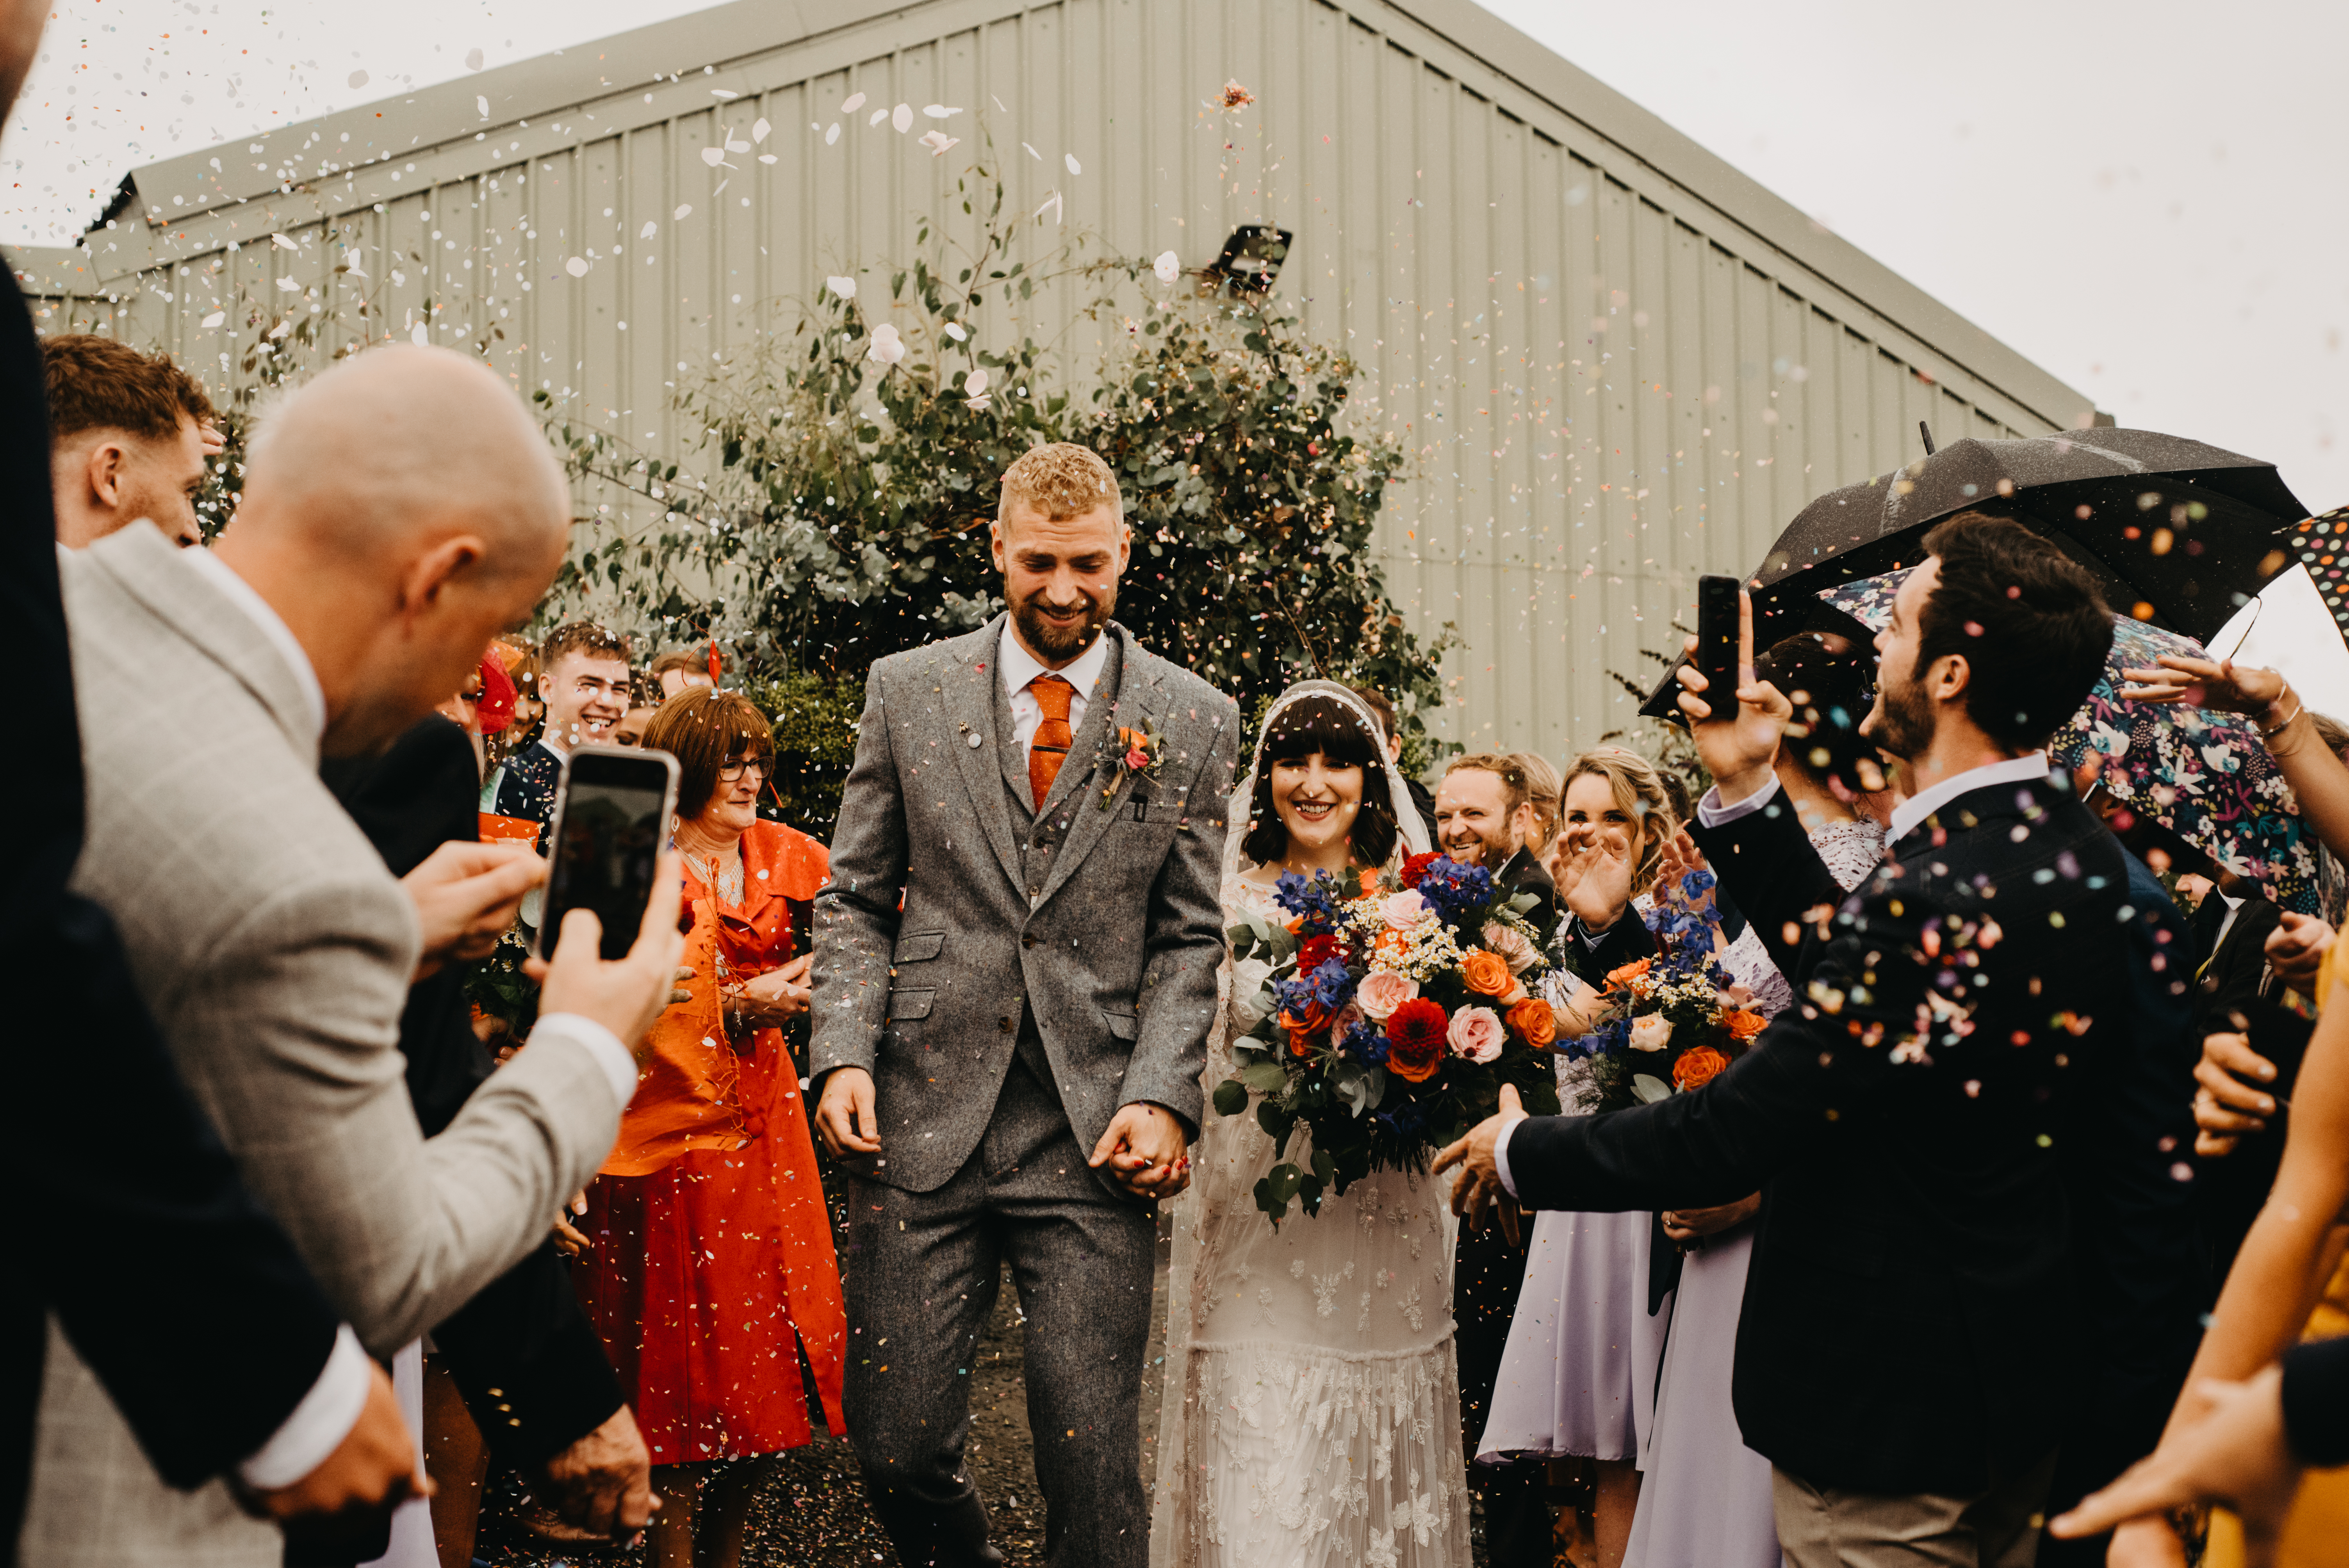 Bride and groom walks while guests throws confetti over them